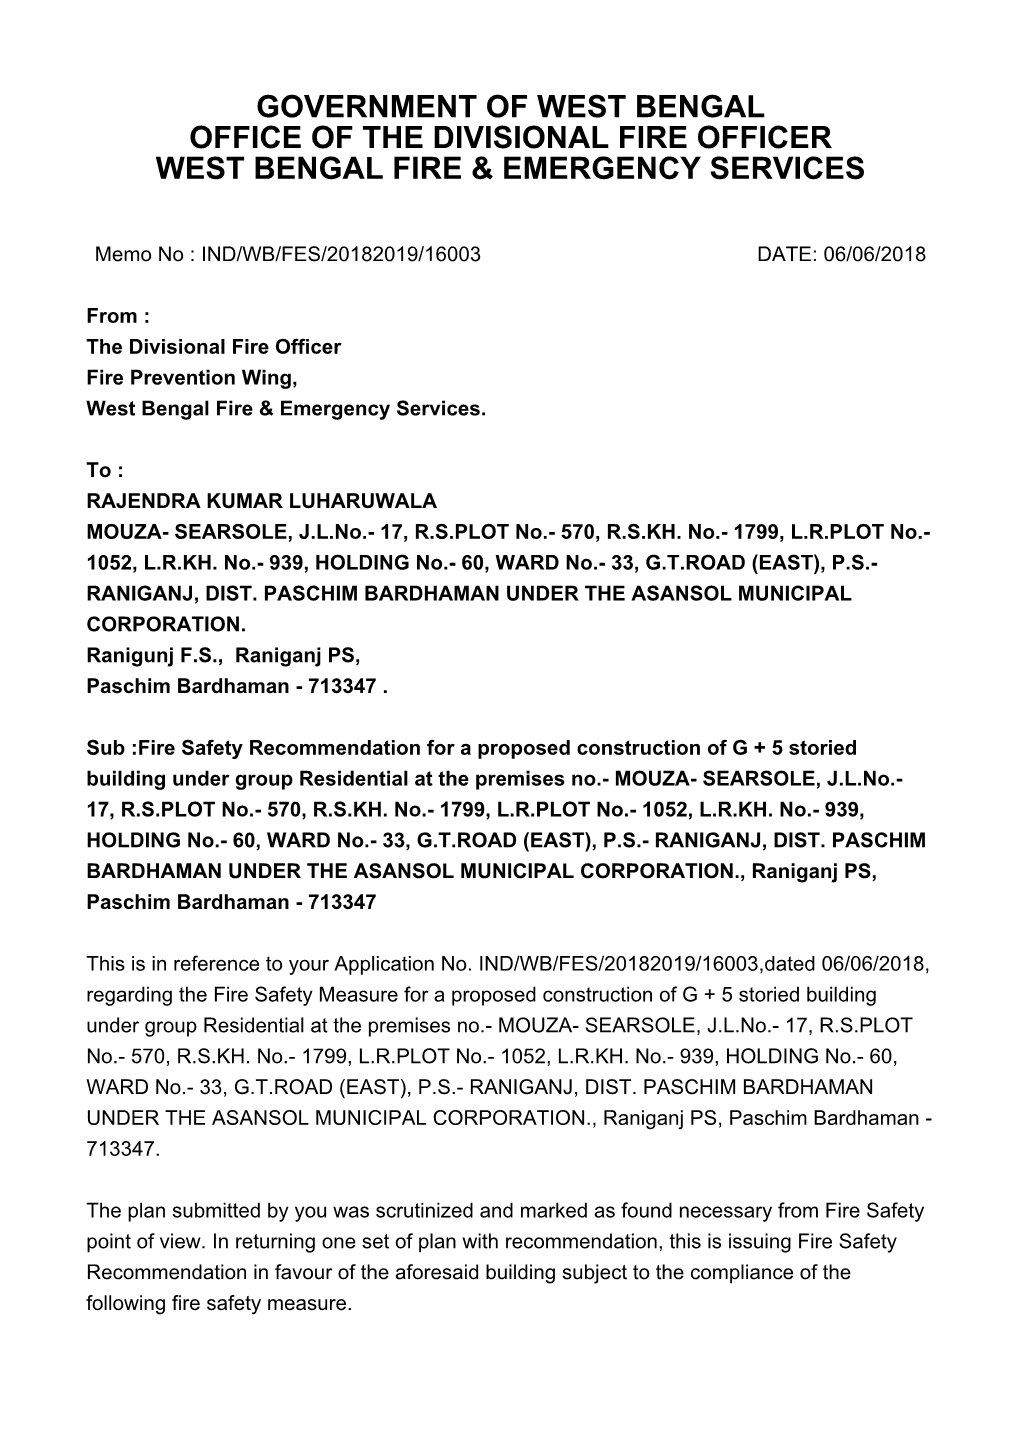 Government of West Bengal Office of the Divisional Fire Officer West Bengal Fire & Emergency Services